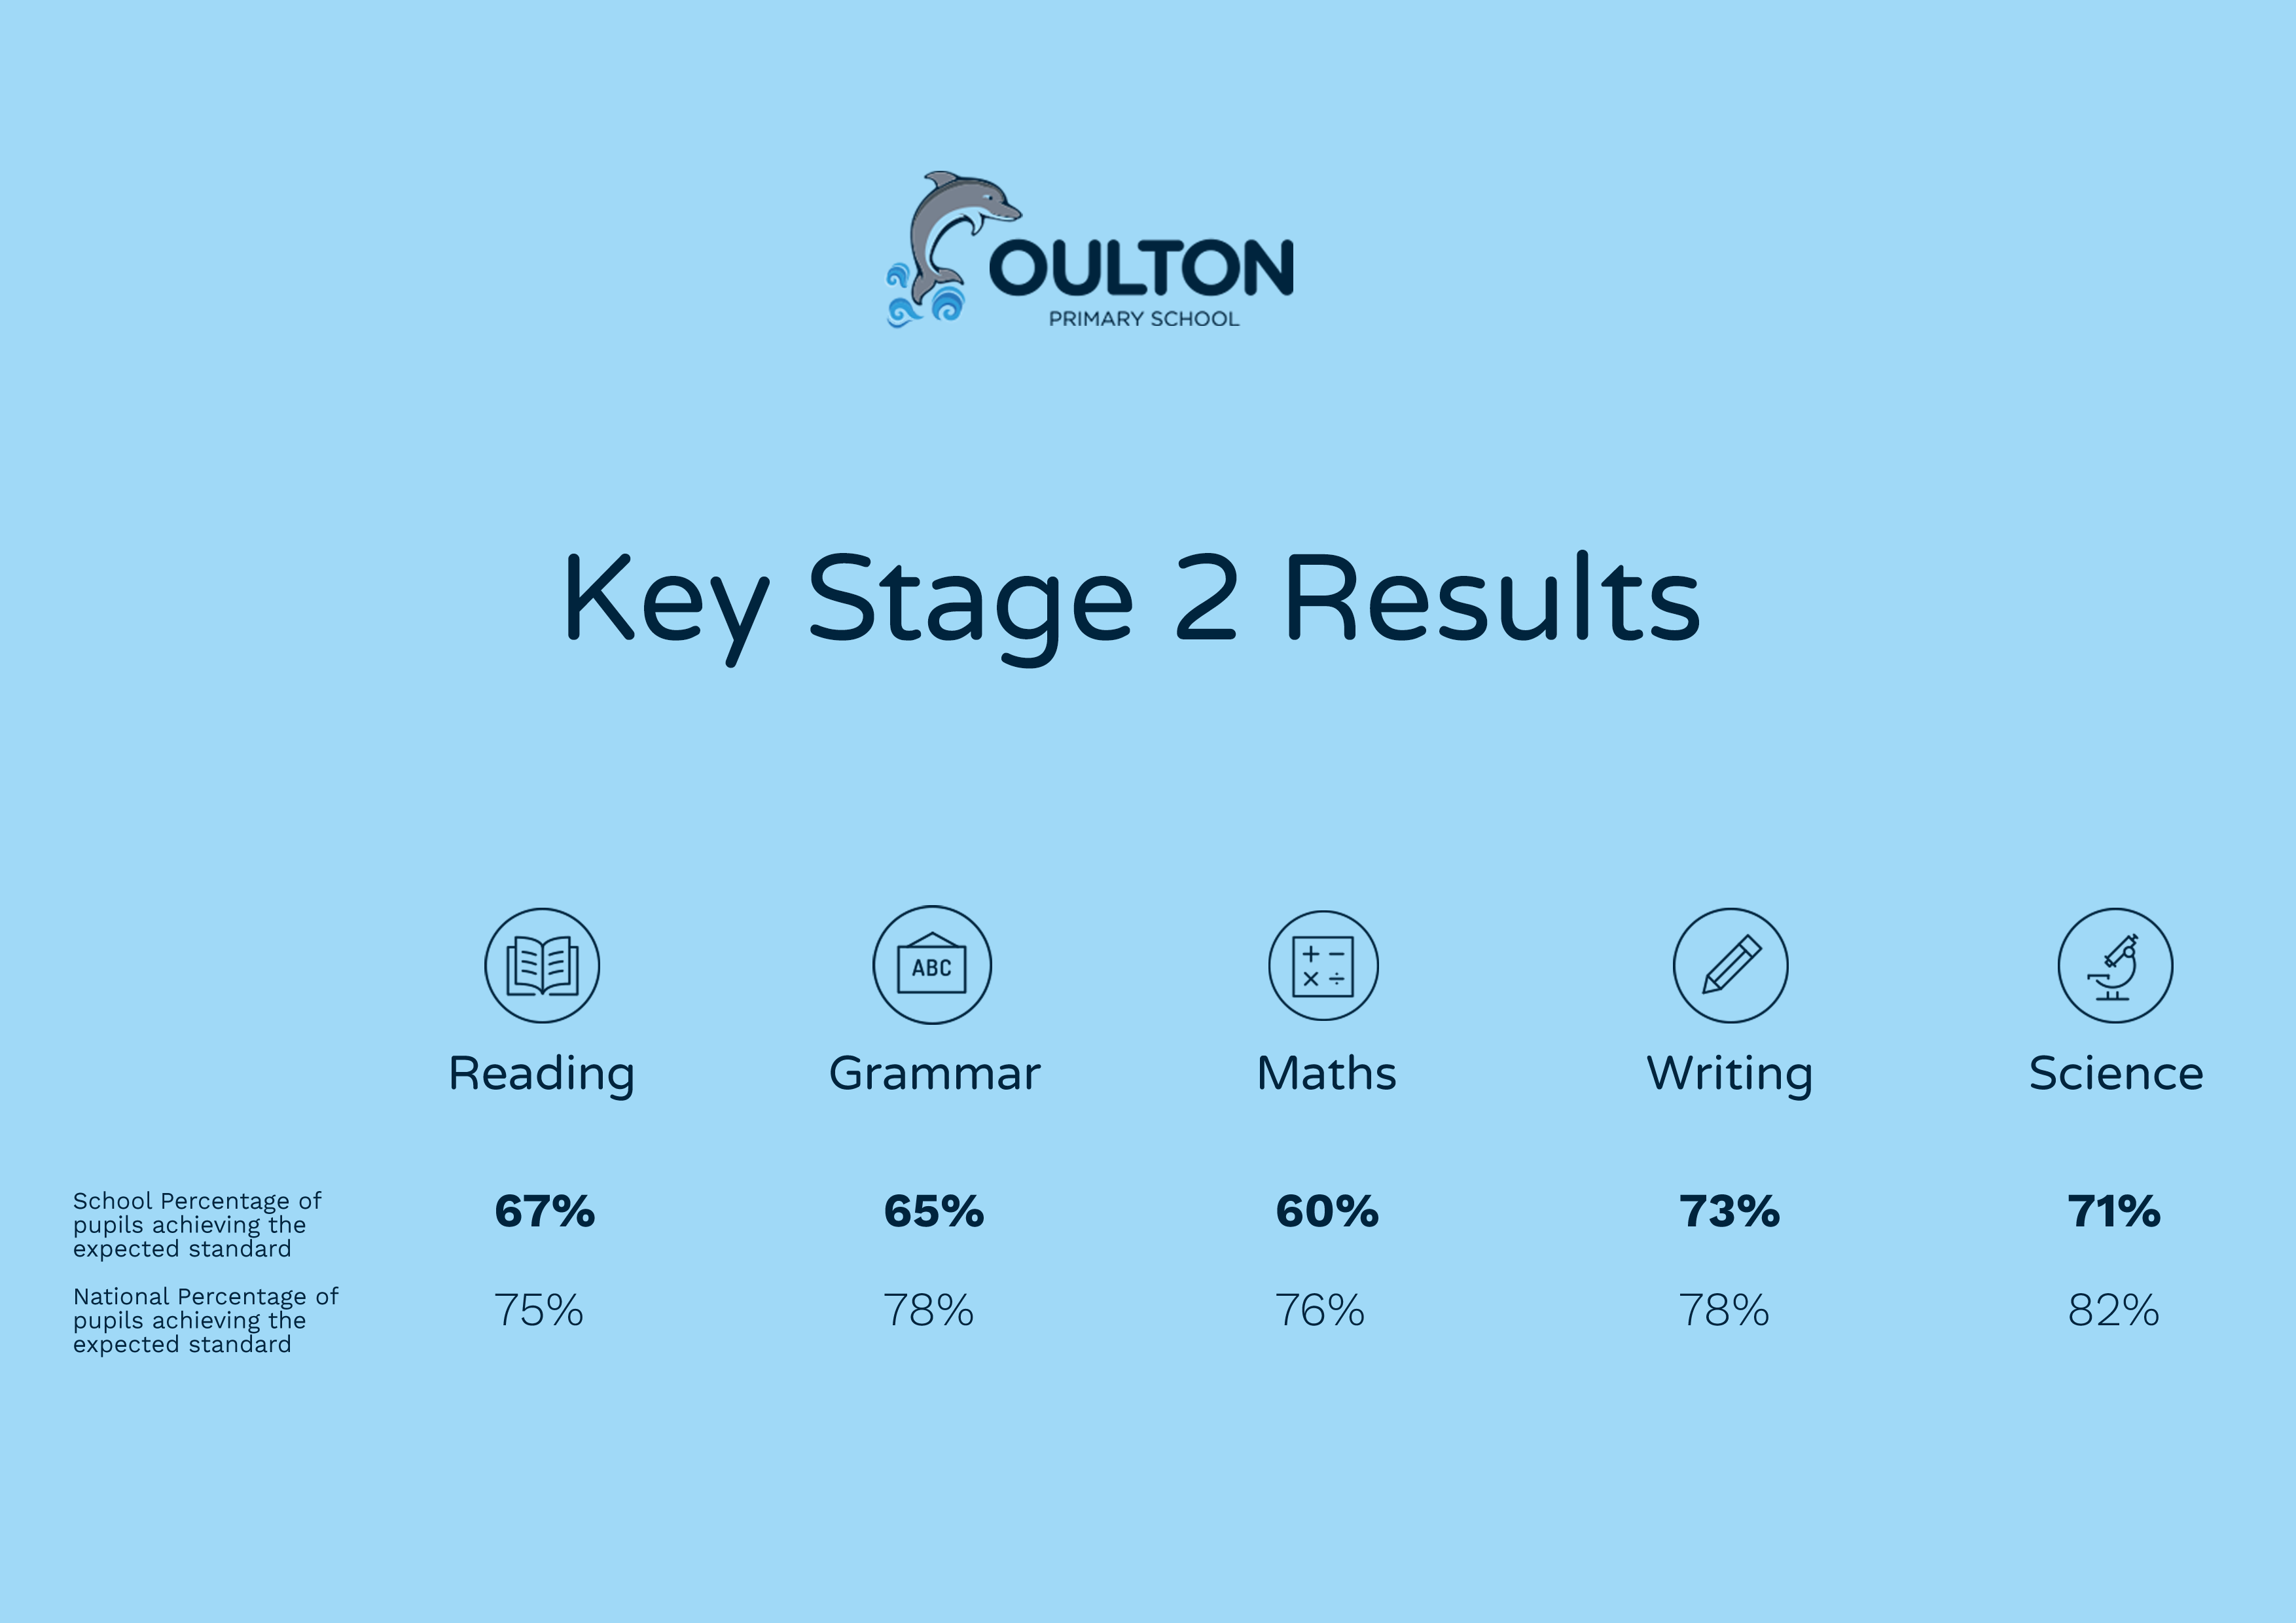 key-stage-2-results-oulton-primary-school